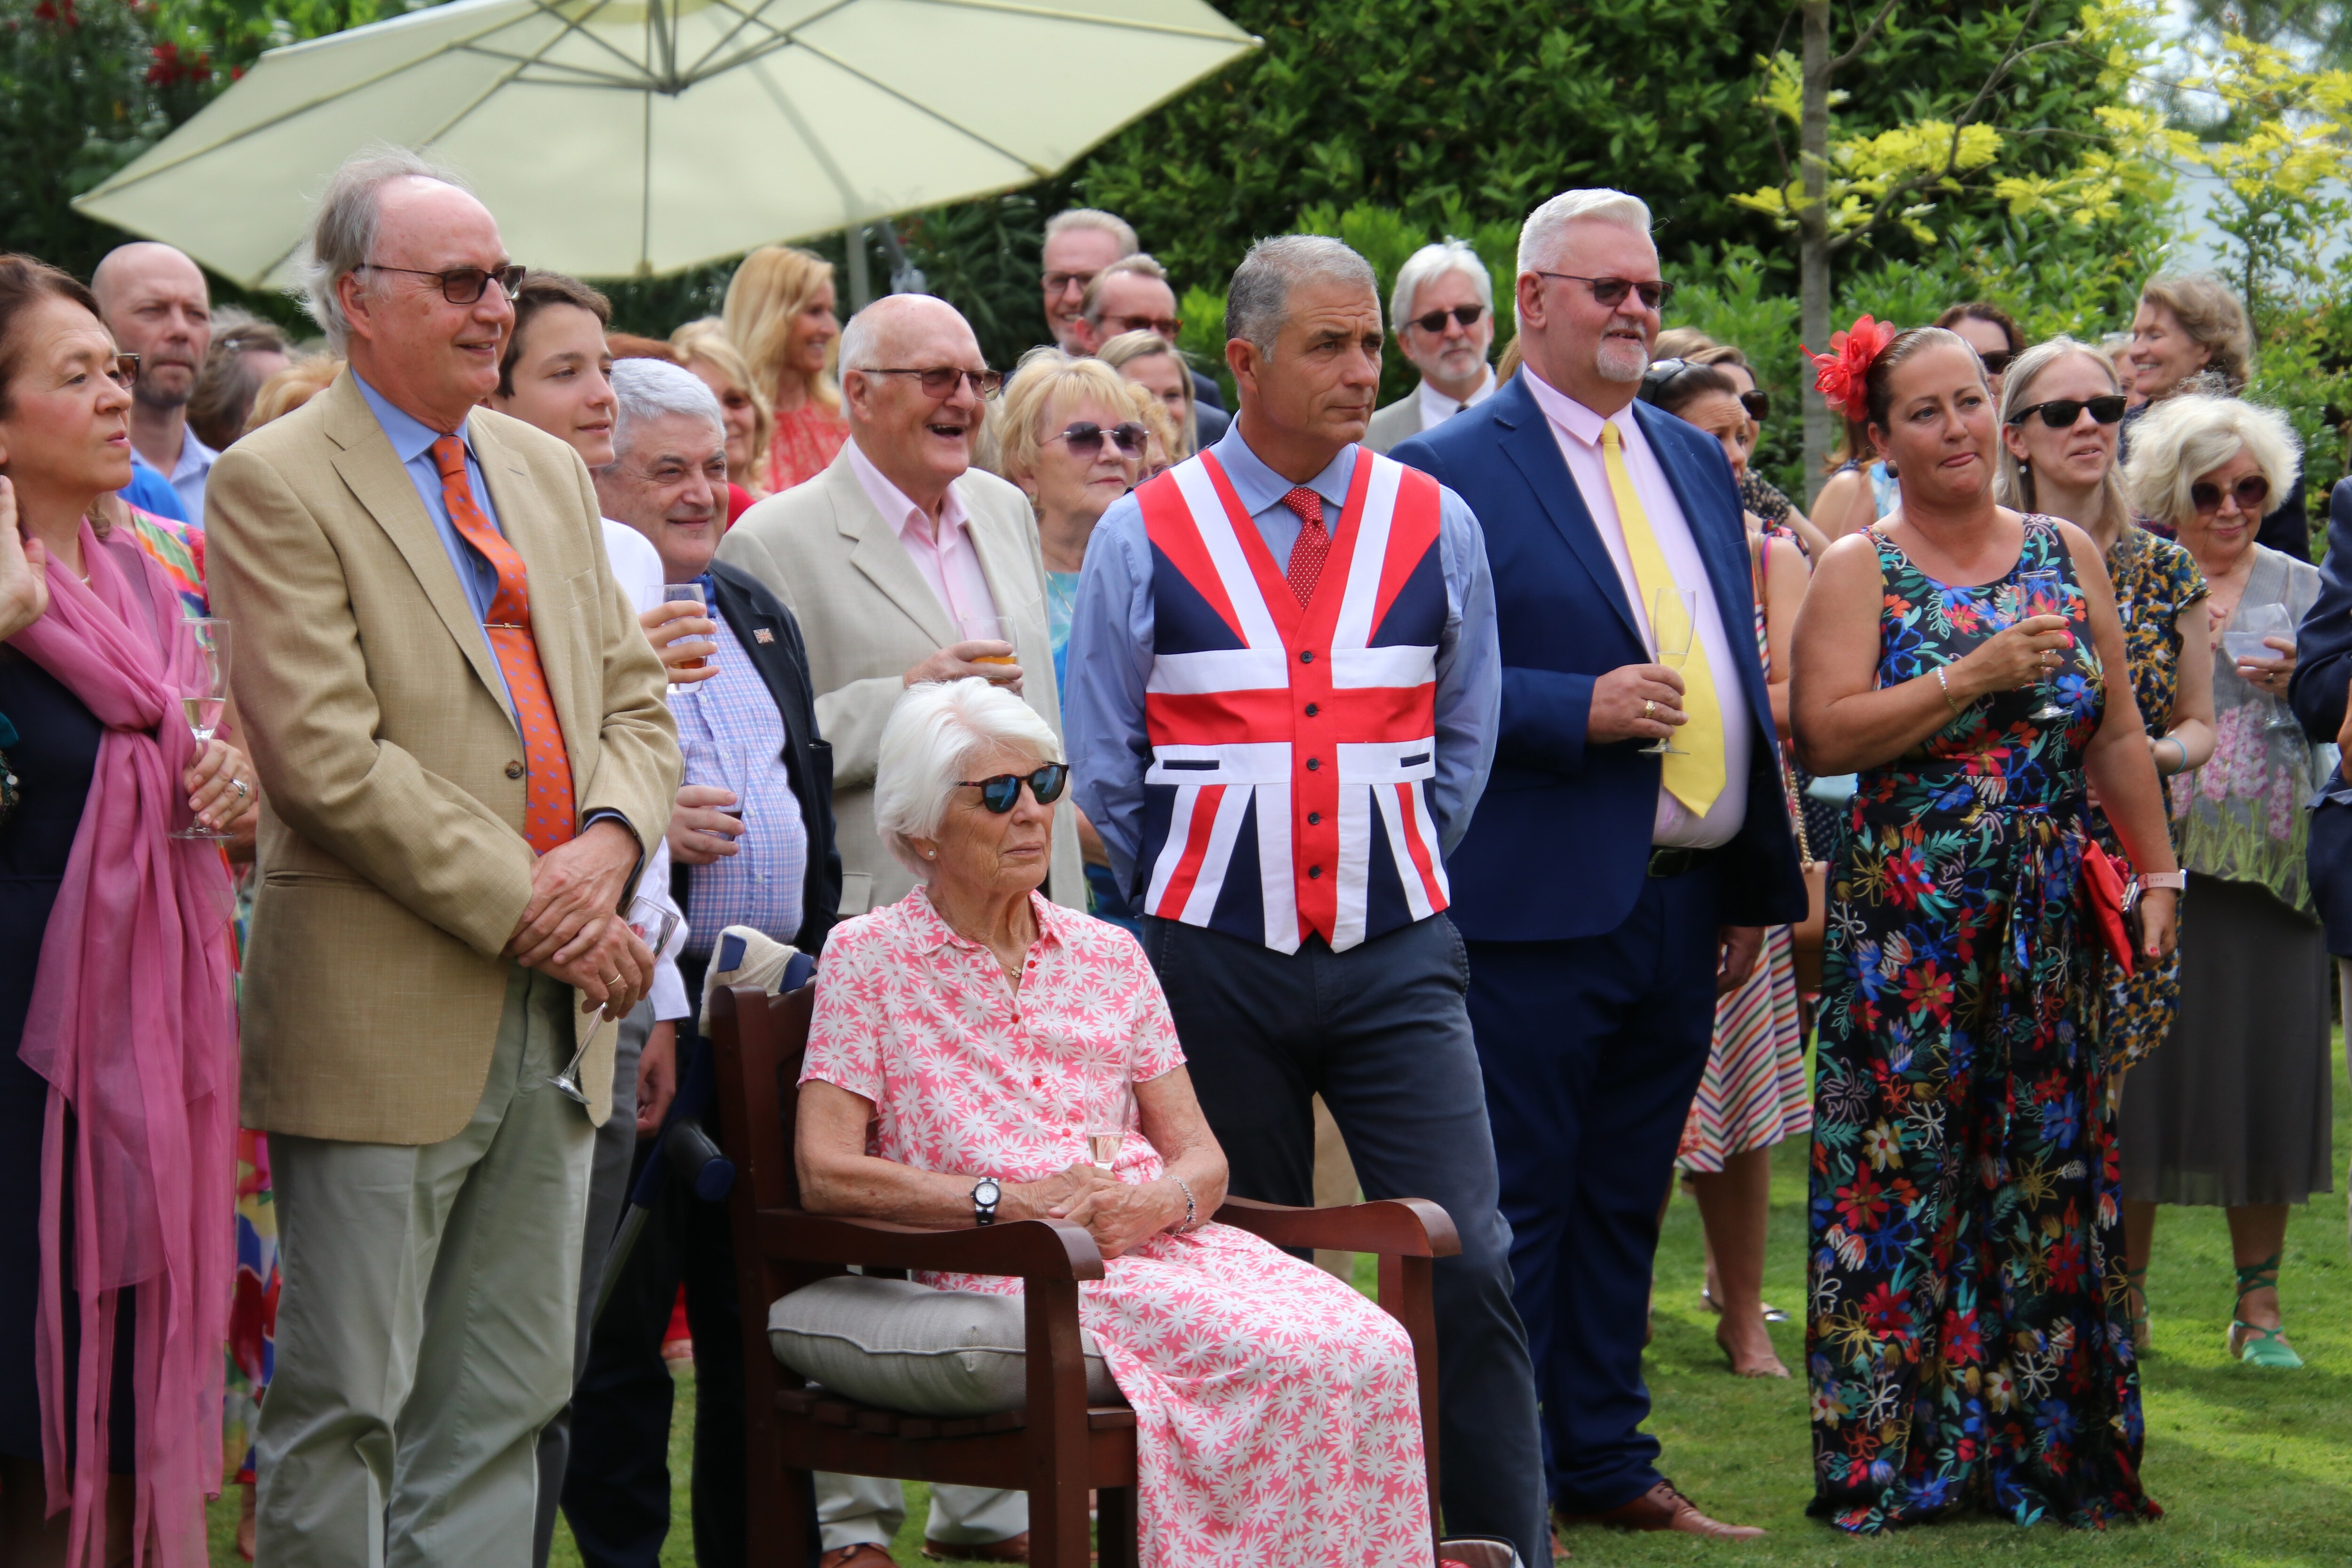 The Queen's Platinum Jubilee was marked in Madrid with a function hosted at the residence of Her Majesty's Ambassador to Spain and Andorra